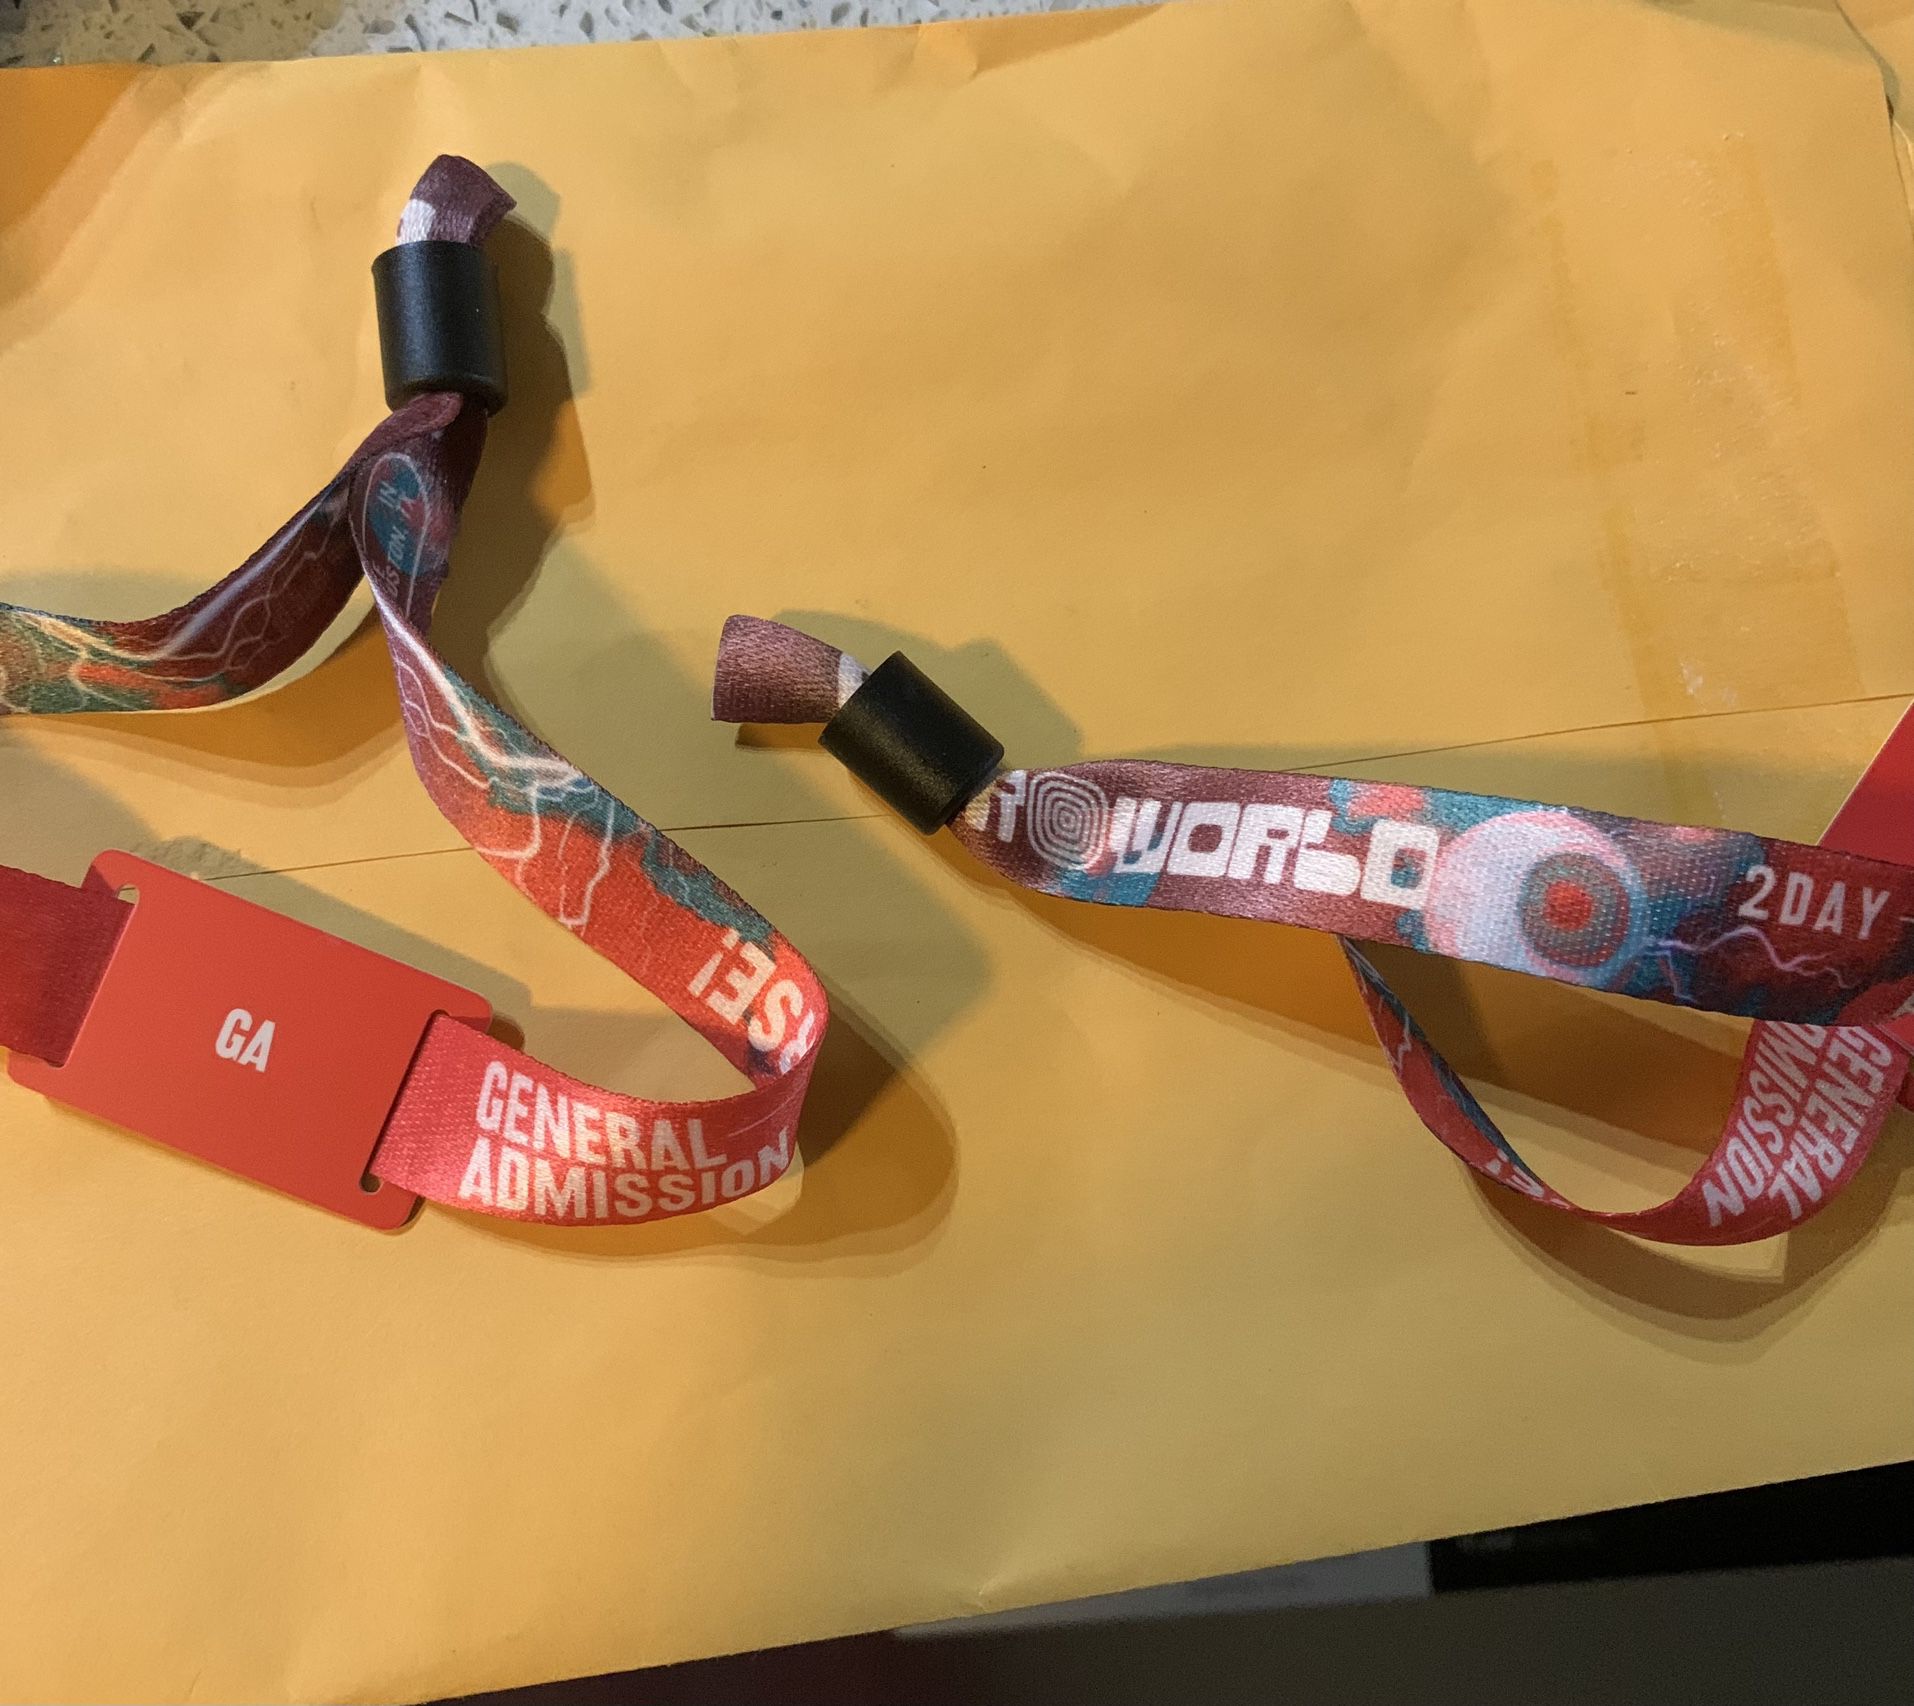 2 Astroworld Wristbands For Sale $400 Each OBO